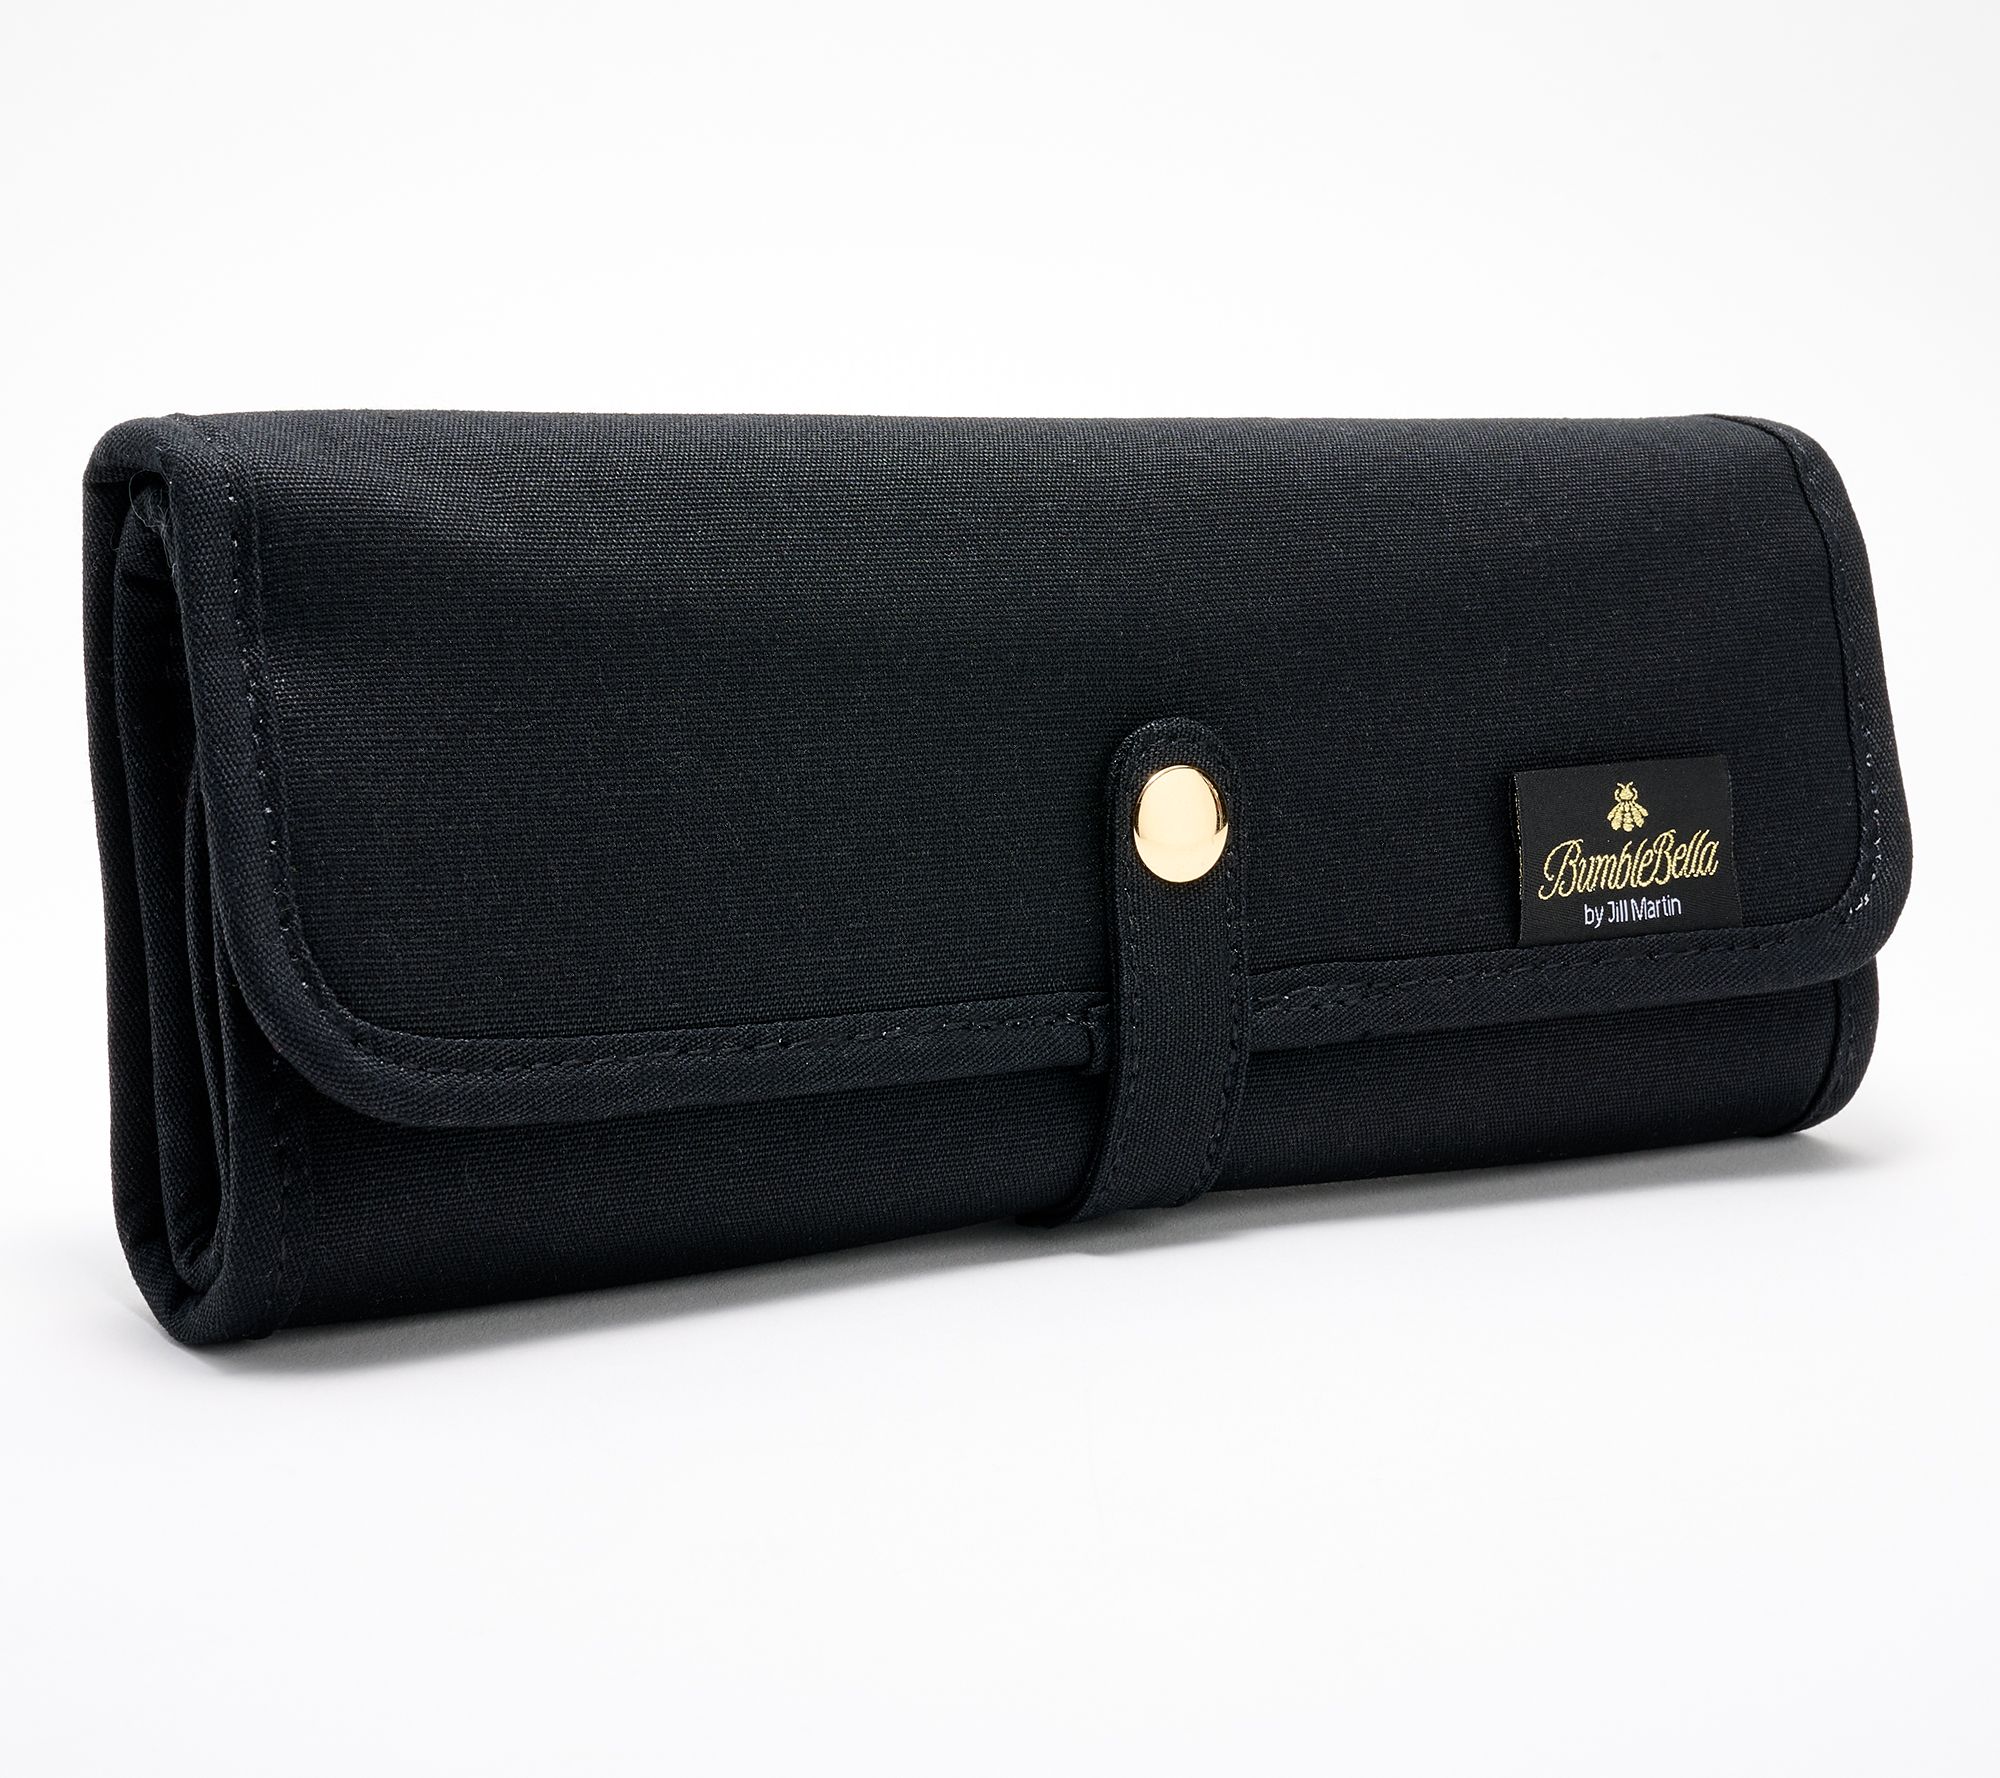 MATEIN Jewellery Travel Pouch Case